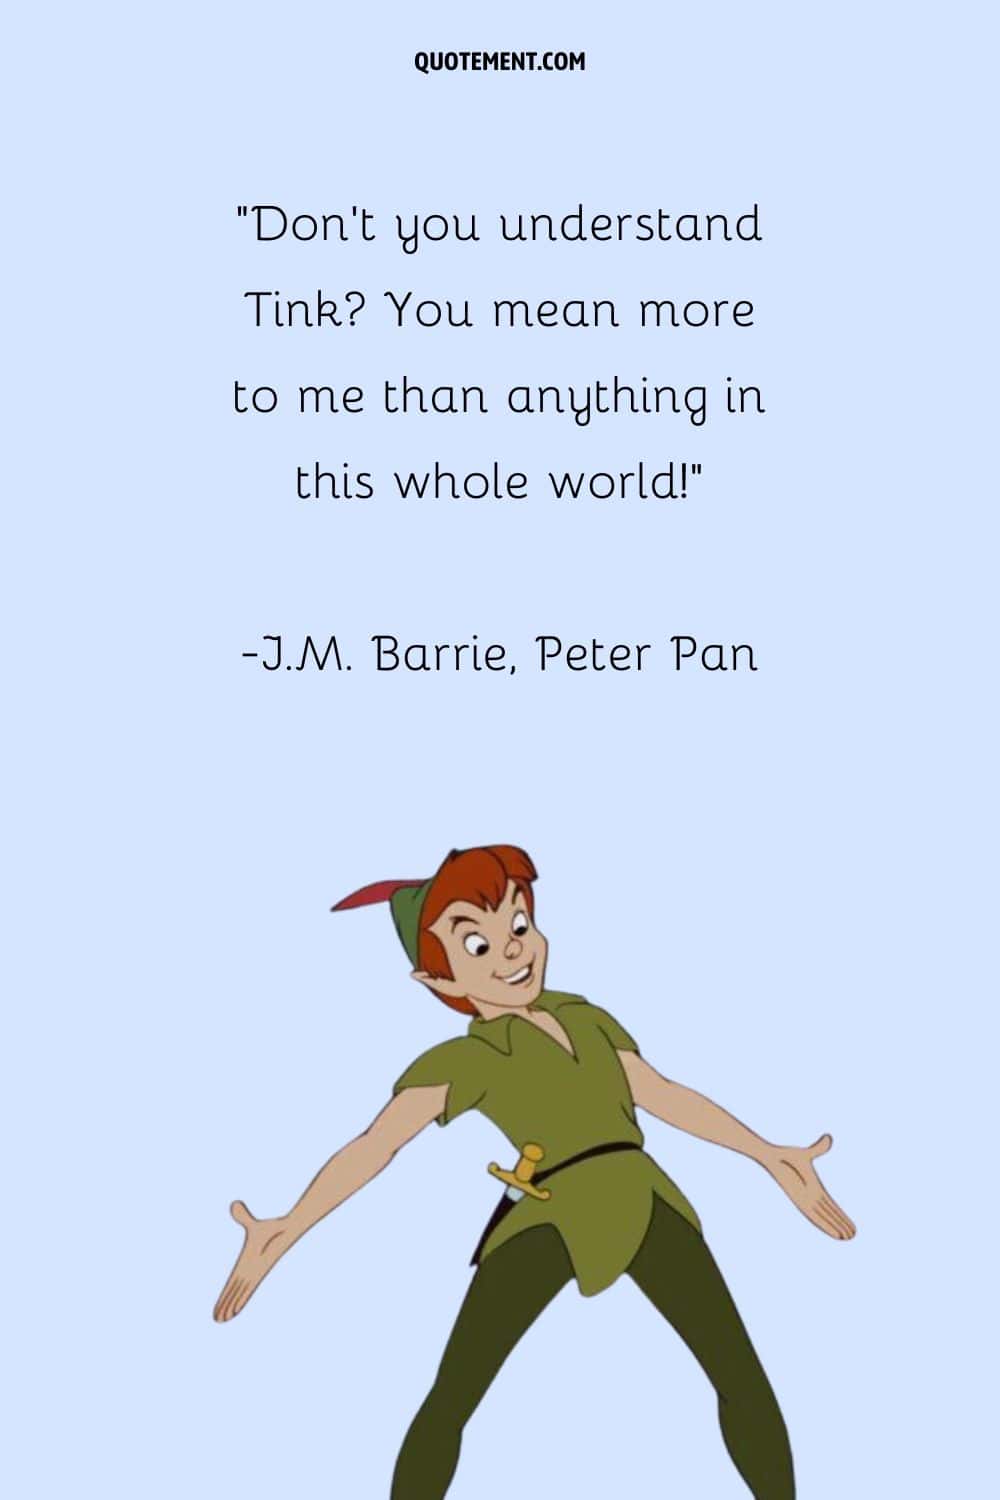 “Don't you understand Tink You mean more to me than anything in this whole world!” ― J.M. Barrie, Peter Pan